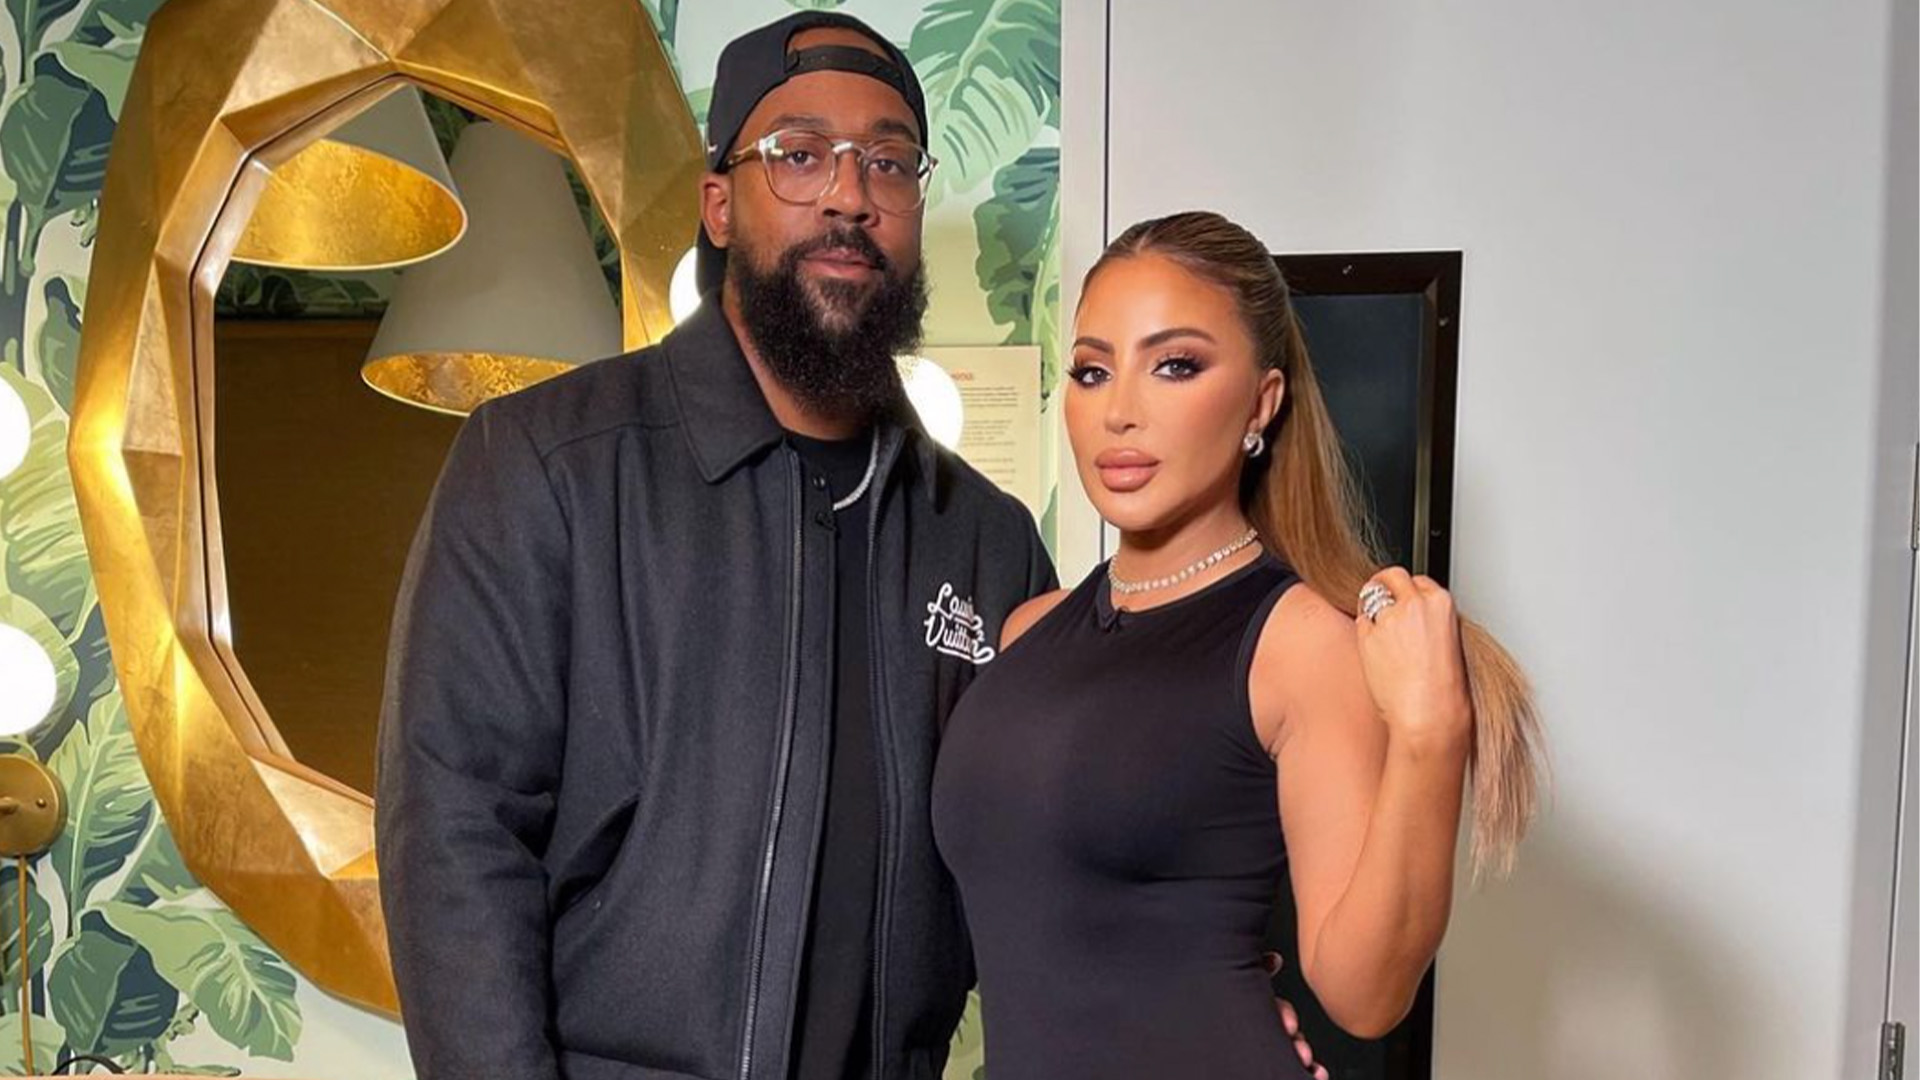 How Larsa Pippen Hid Relationship with Marcus Jordan in the Early Days